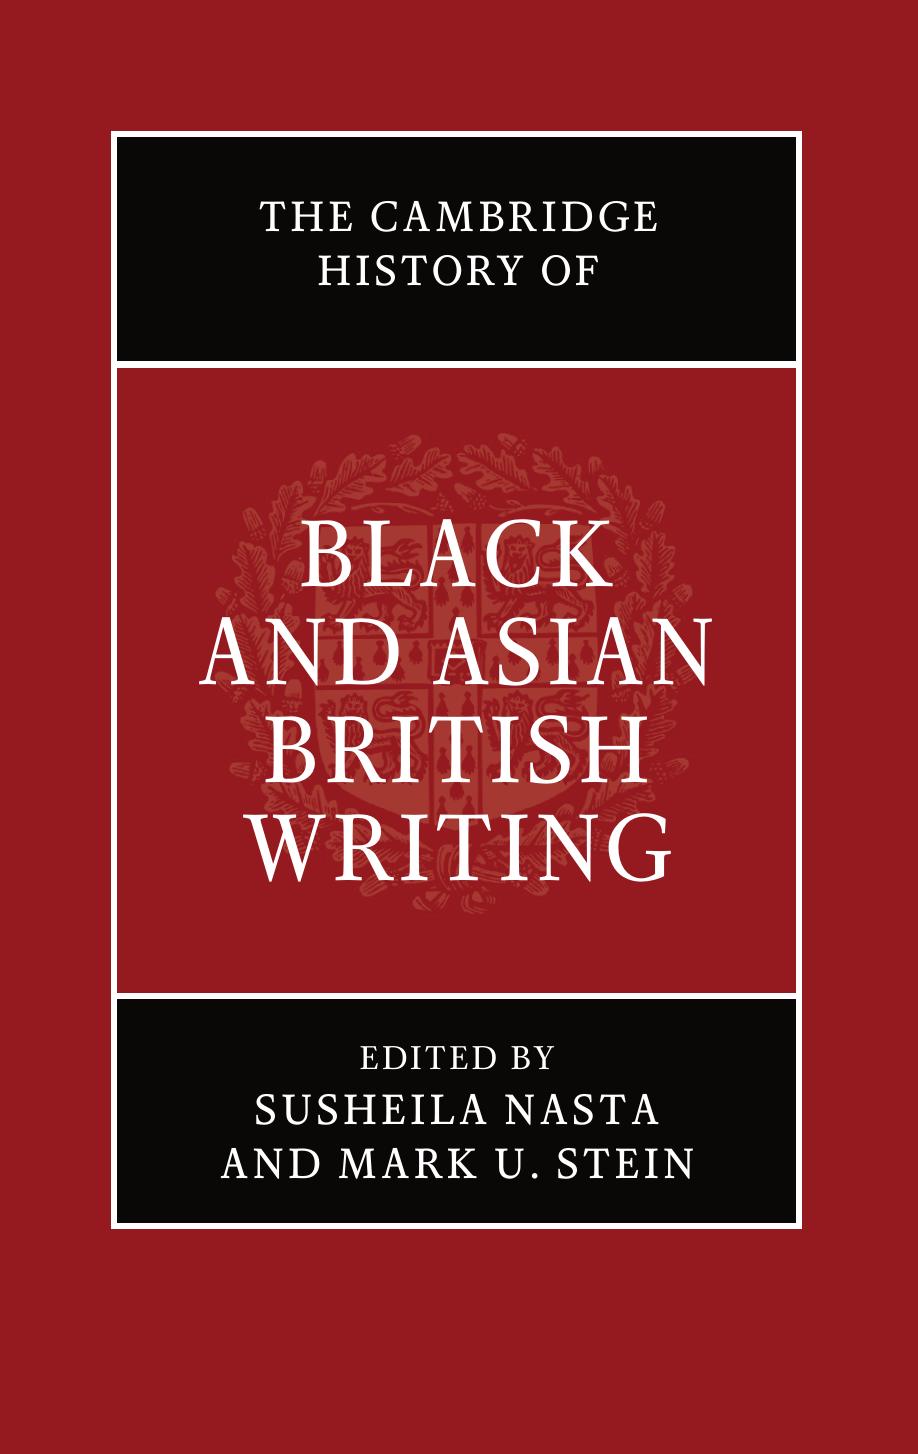 The Cambridge History of Black and Asian British Writing 2020